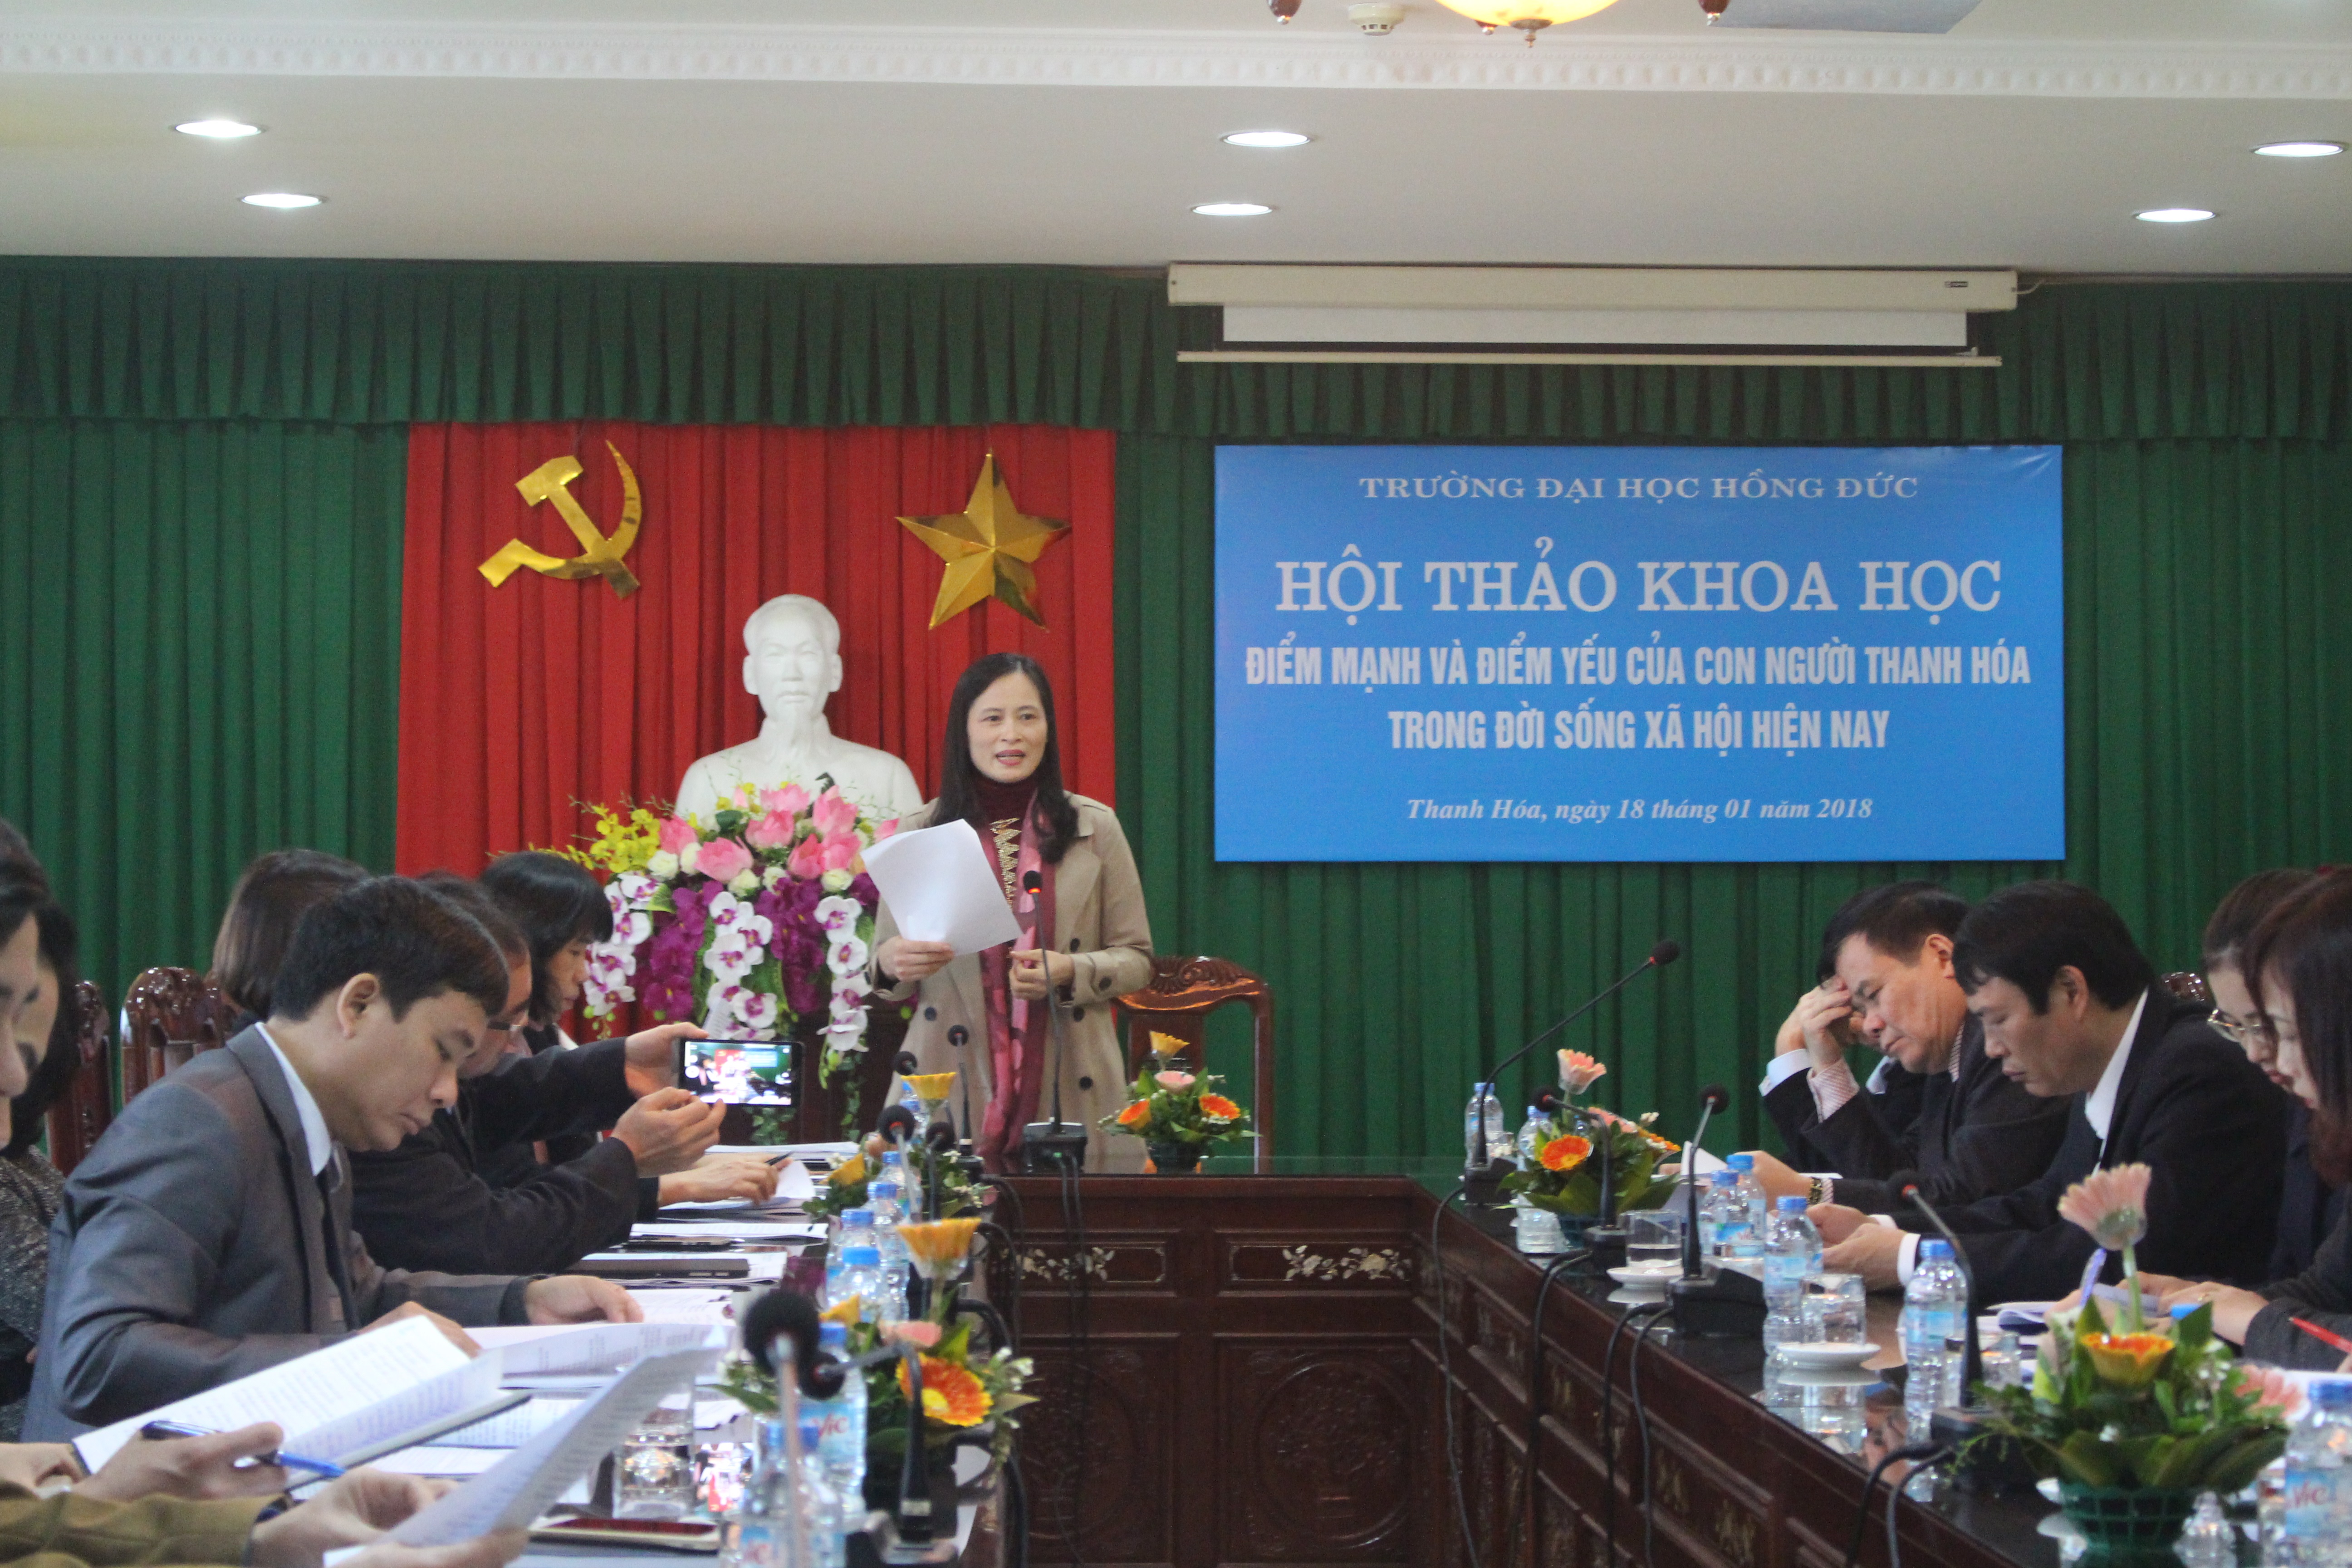 Workshop on "Strengths and weaknesses of Thanh Hoa people in social life"